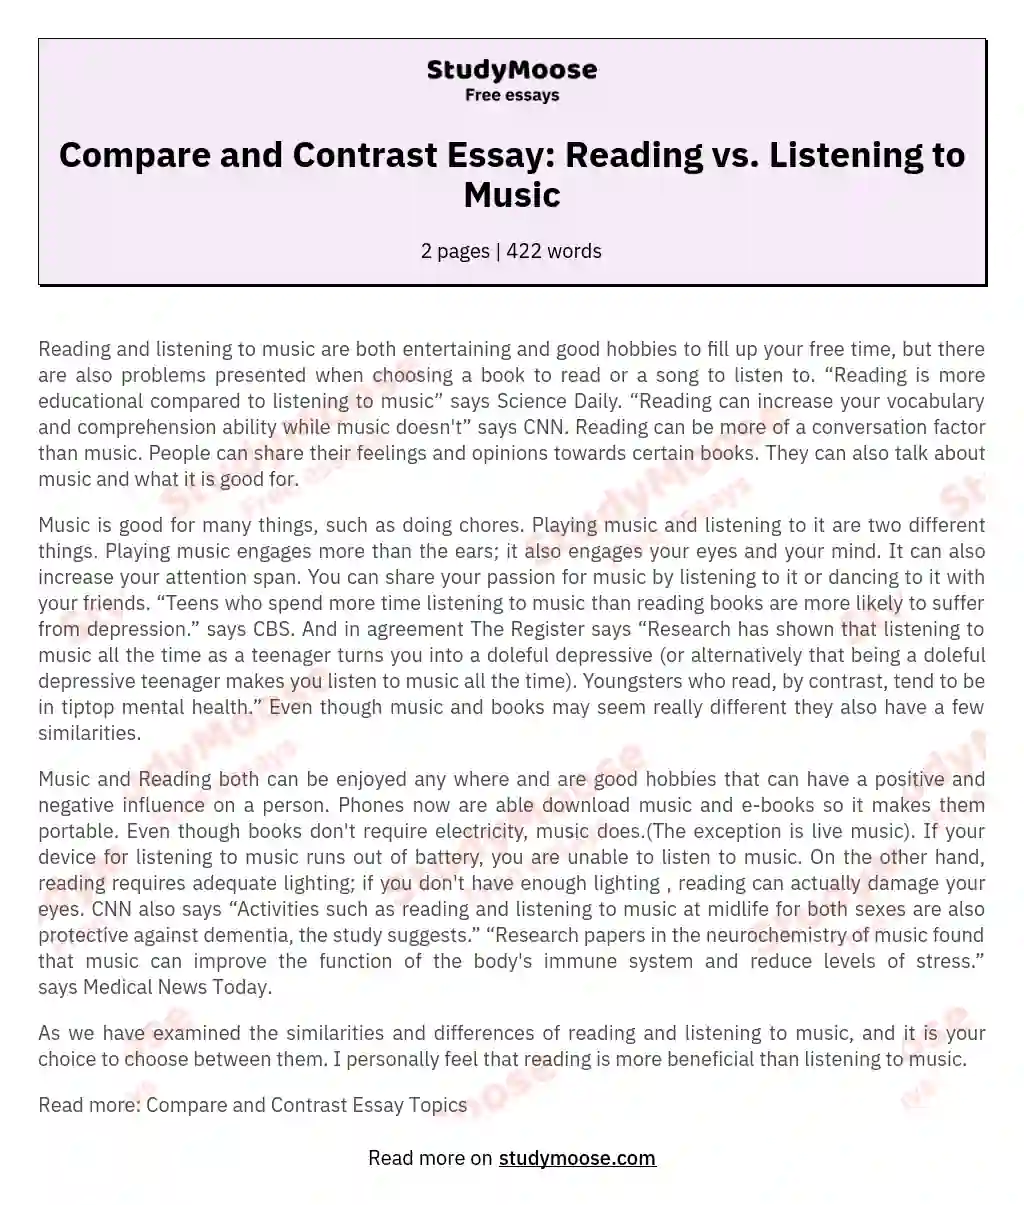 Compare and Contrast Essay: Reading vs. Listening to Music